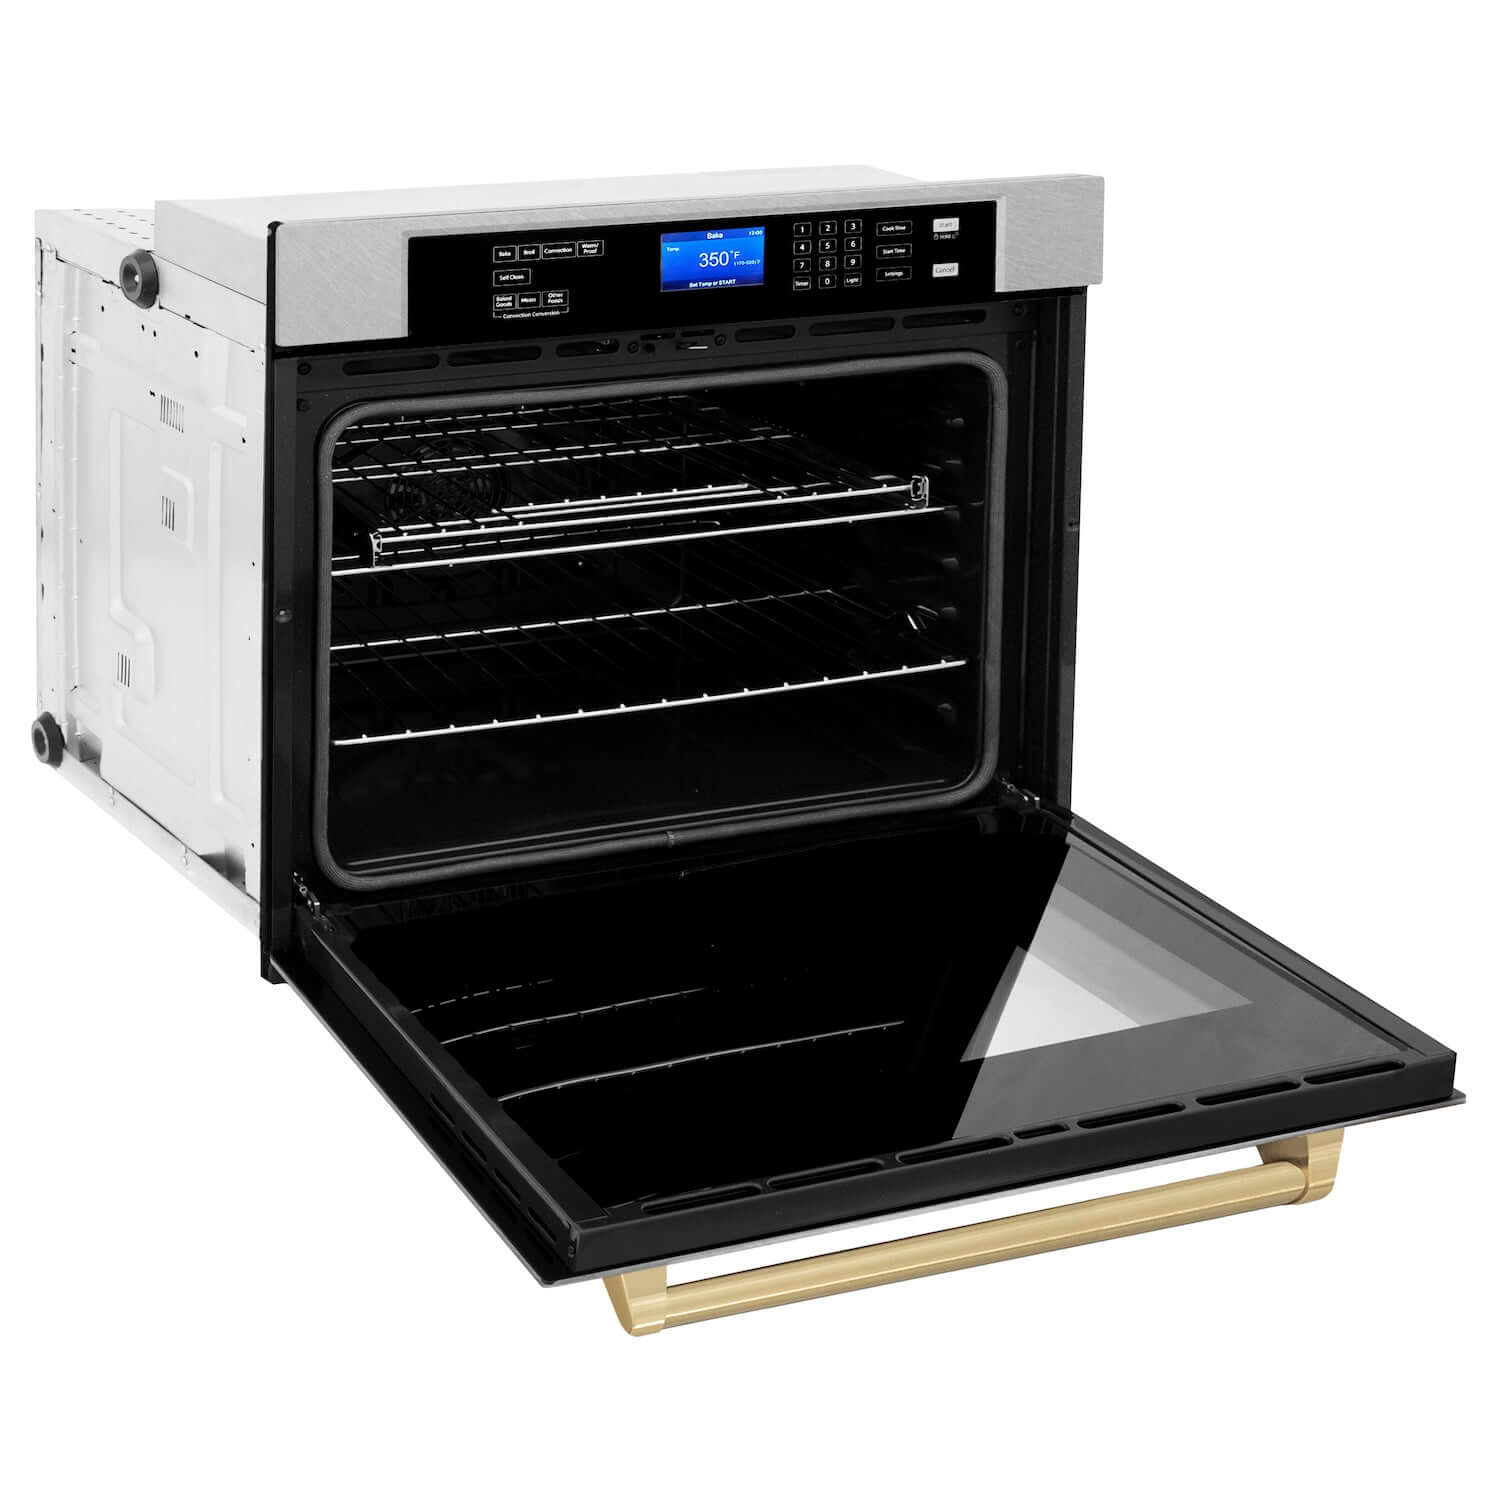 ZLINE Autograph Edition 30 in. Electric Single Wall Oven with Self Clean and True Convection in Fingerprint Resistant Stainless Steel and Champagne Bronze Accents (AWSSZ-30-CB) side, open.